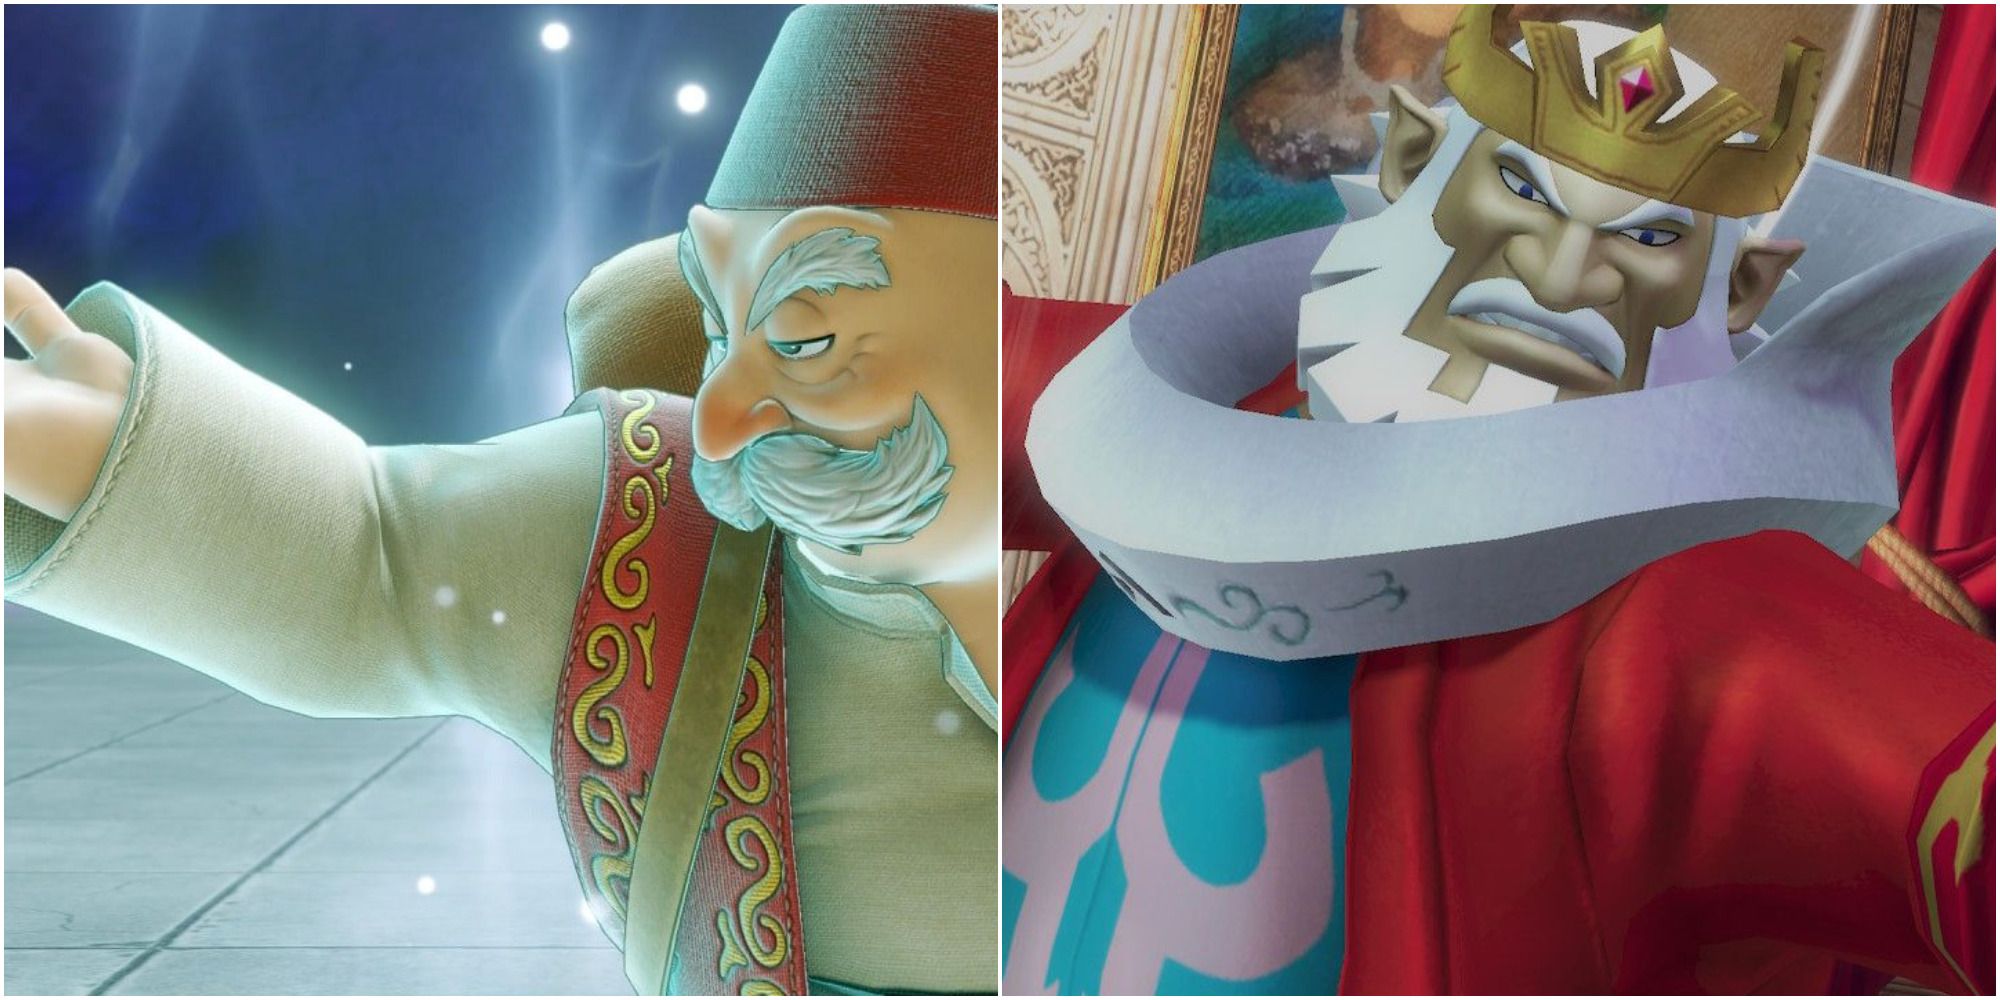 Rab from Dragon Quest XI and King Daphnes in Hyrule Warriors